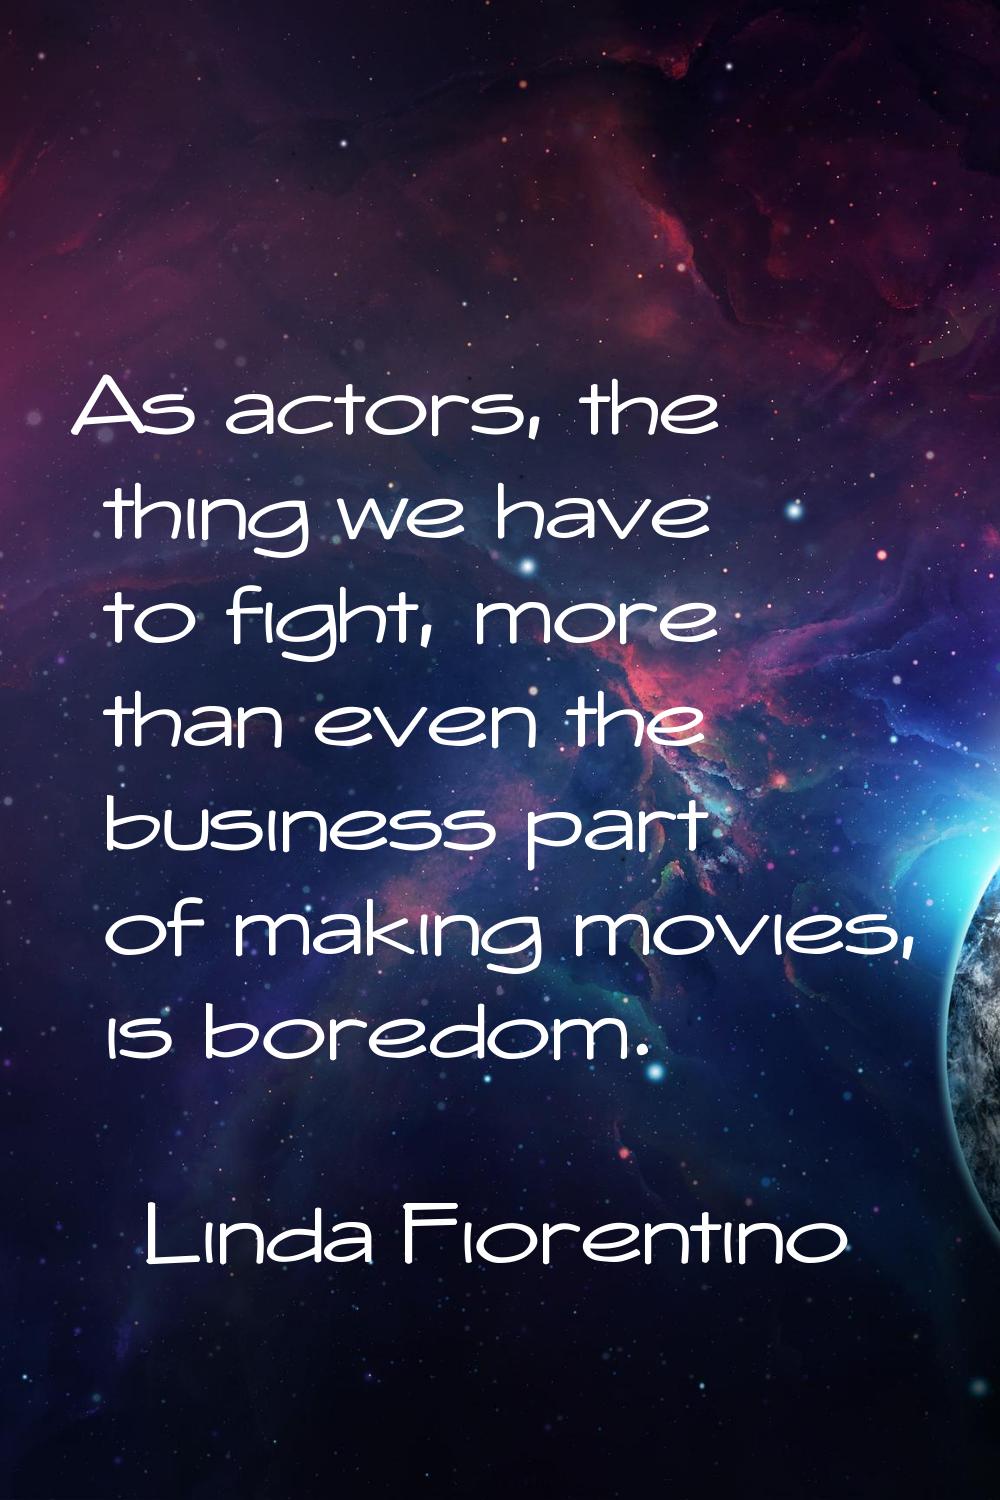 As actors, the thing we have to fight, more than even the business part of making movies, is boredo